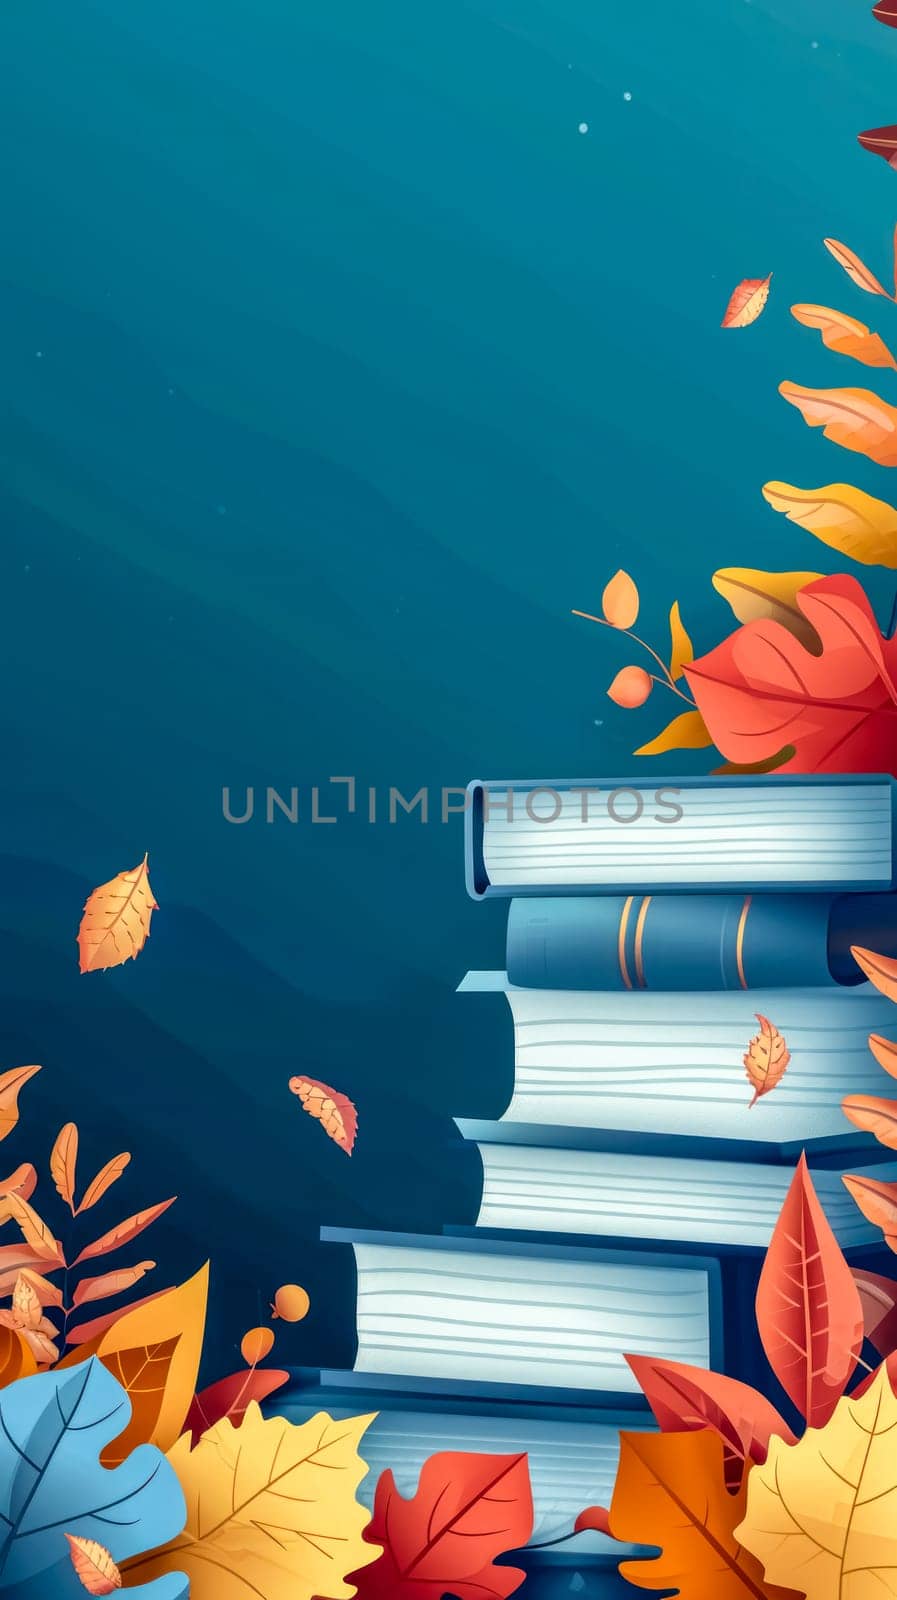 Autumn reads: Dive into the depth of knowledge, books, copy space by Edophoto